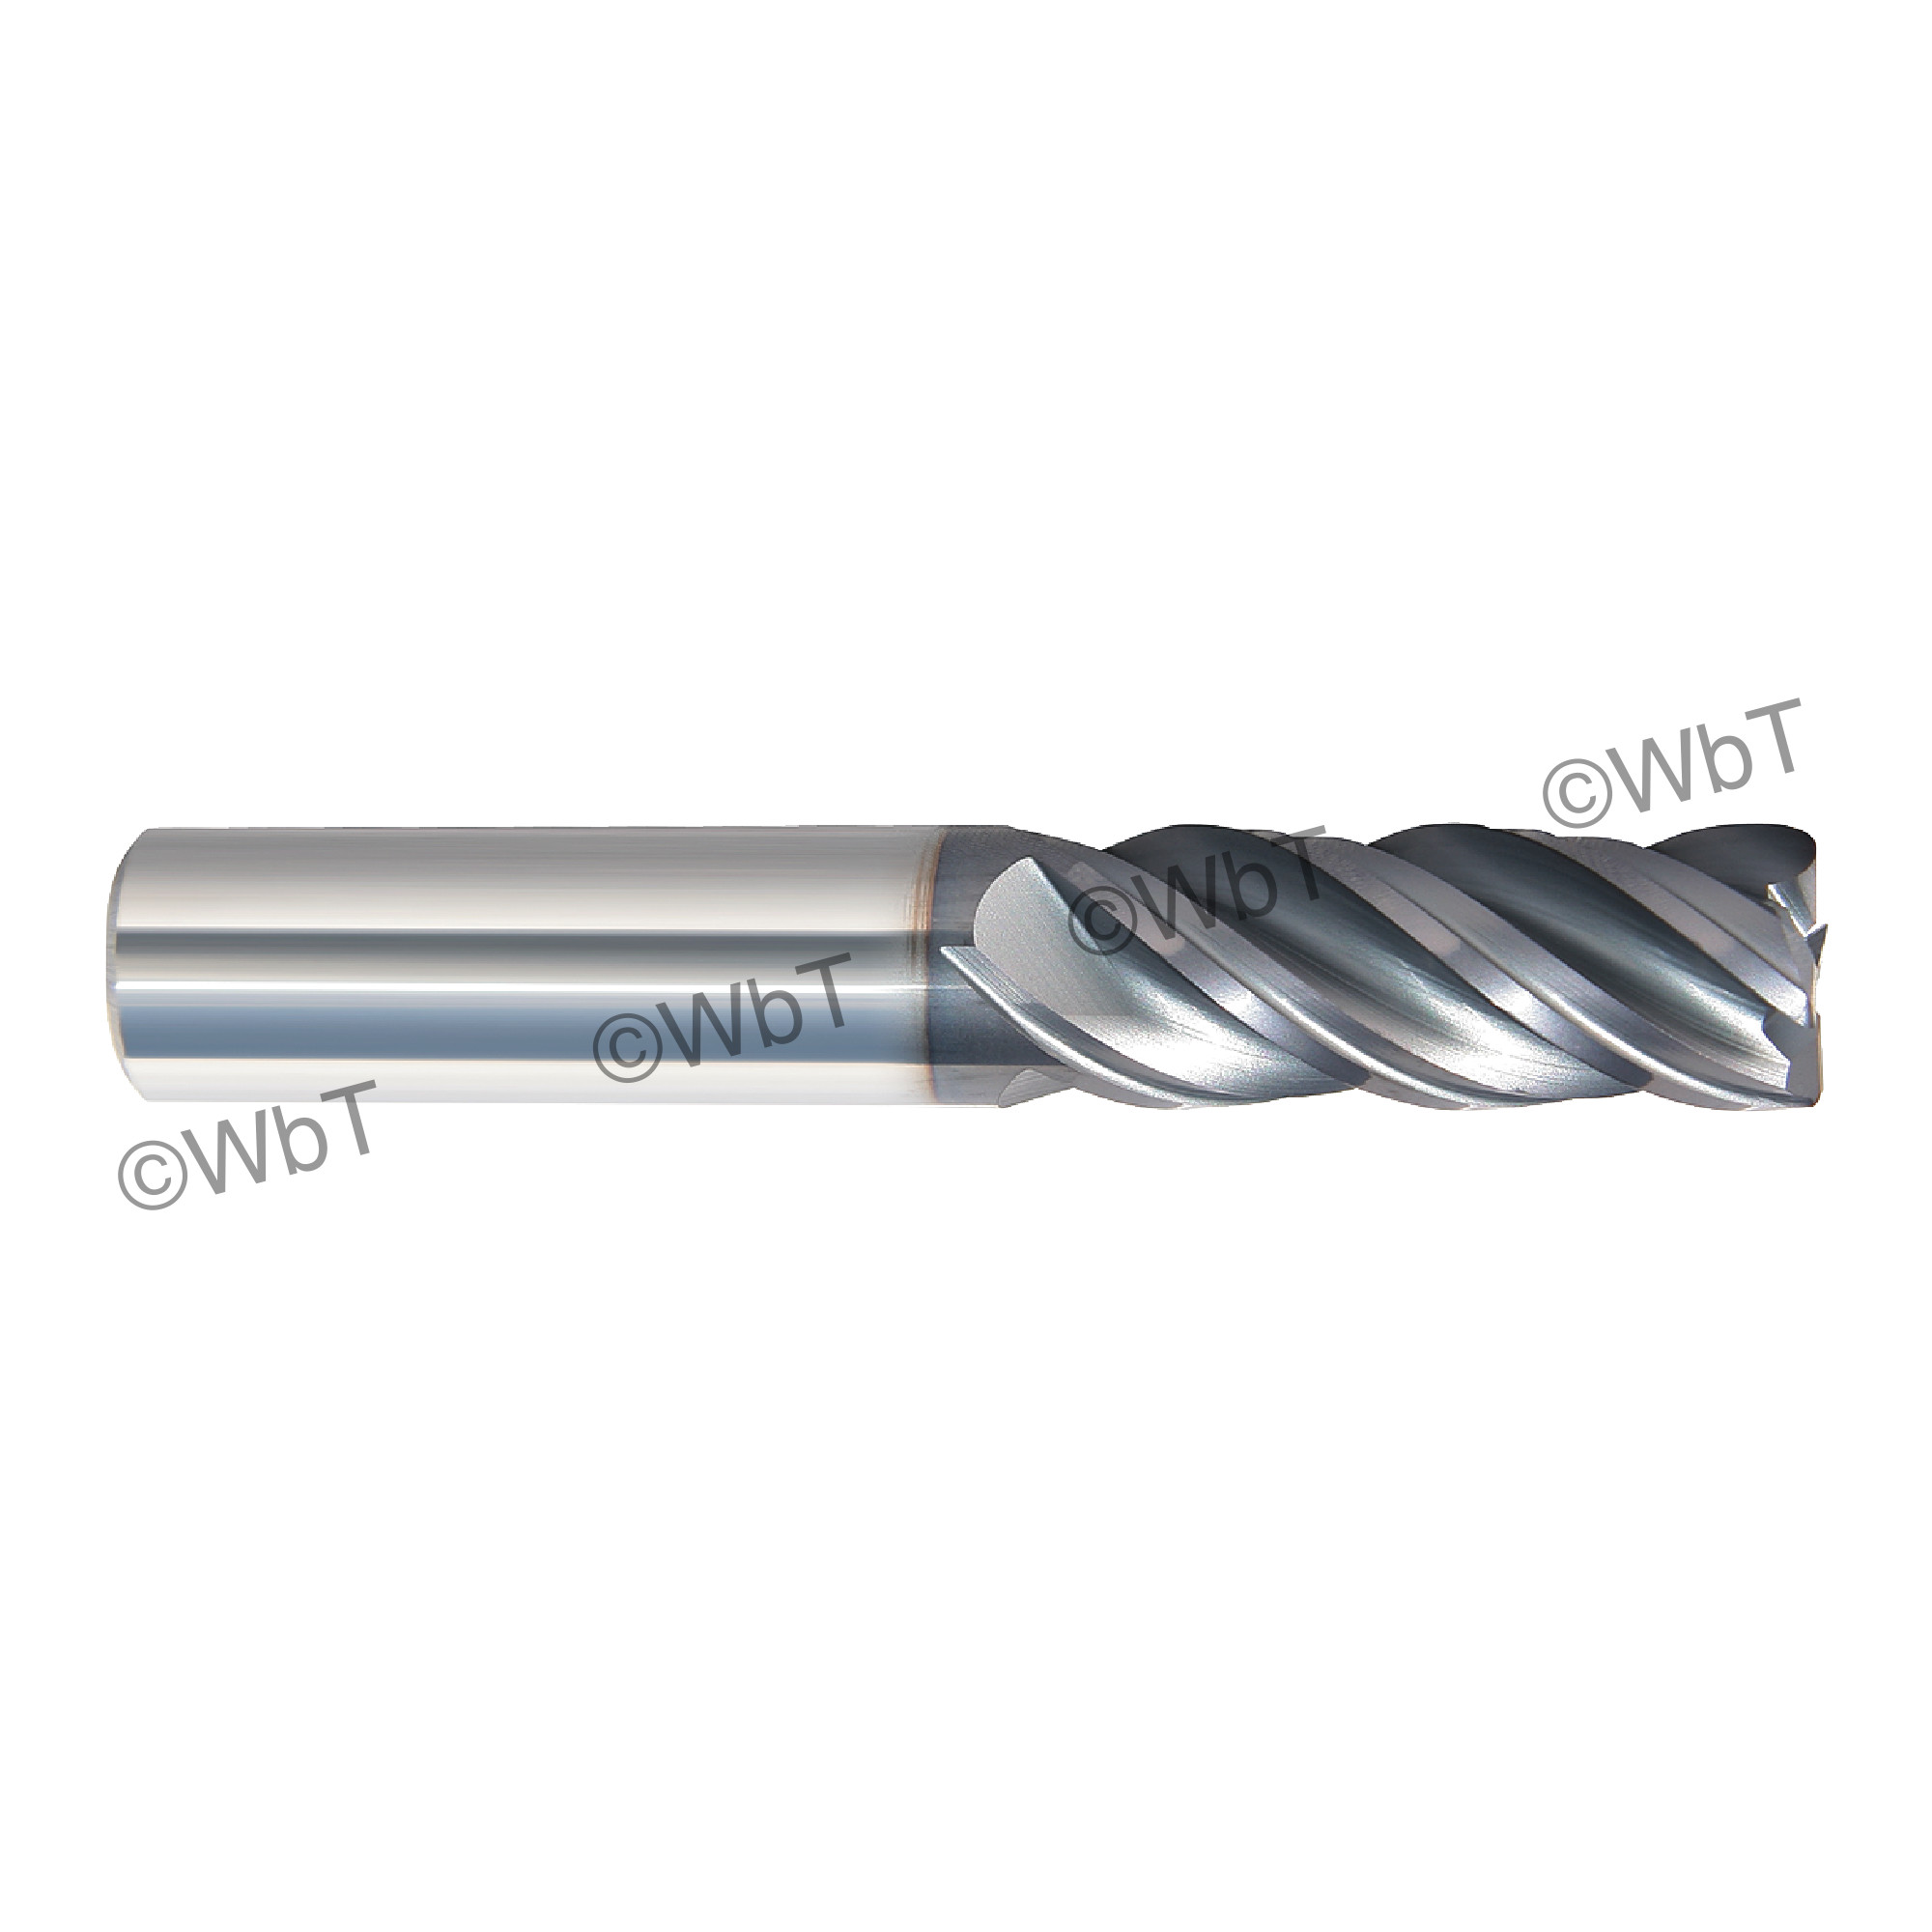 Rushmore USA 1" x 1-1/2" Flute Solid Carbide Variable Helix Unequal Index AlTiN Coated Corner Radius 4 Flute Roughing & 